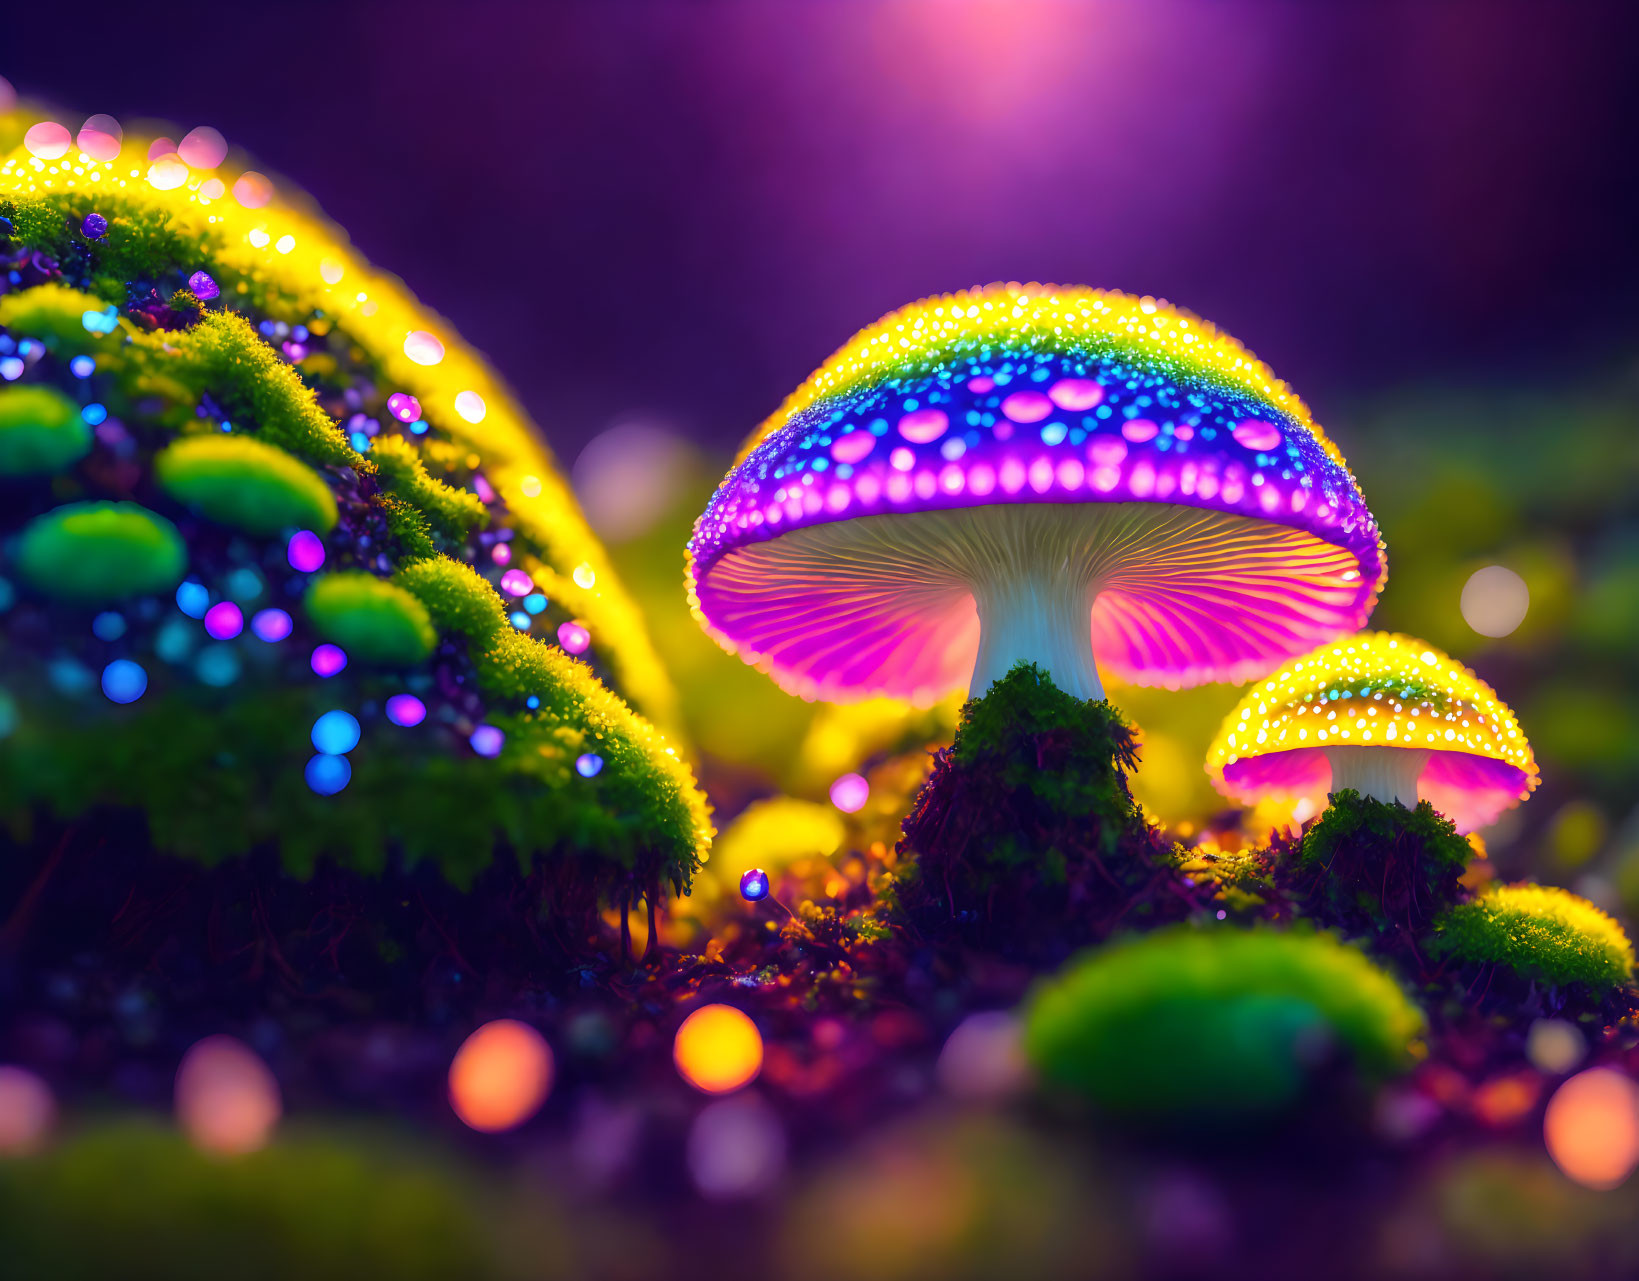 Magically Magnificent Mushrooms